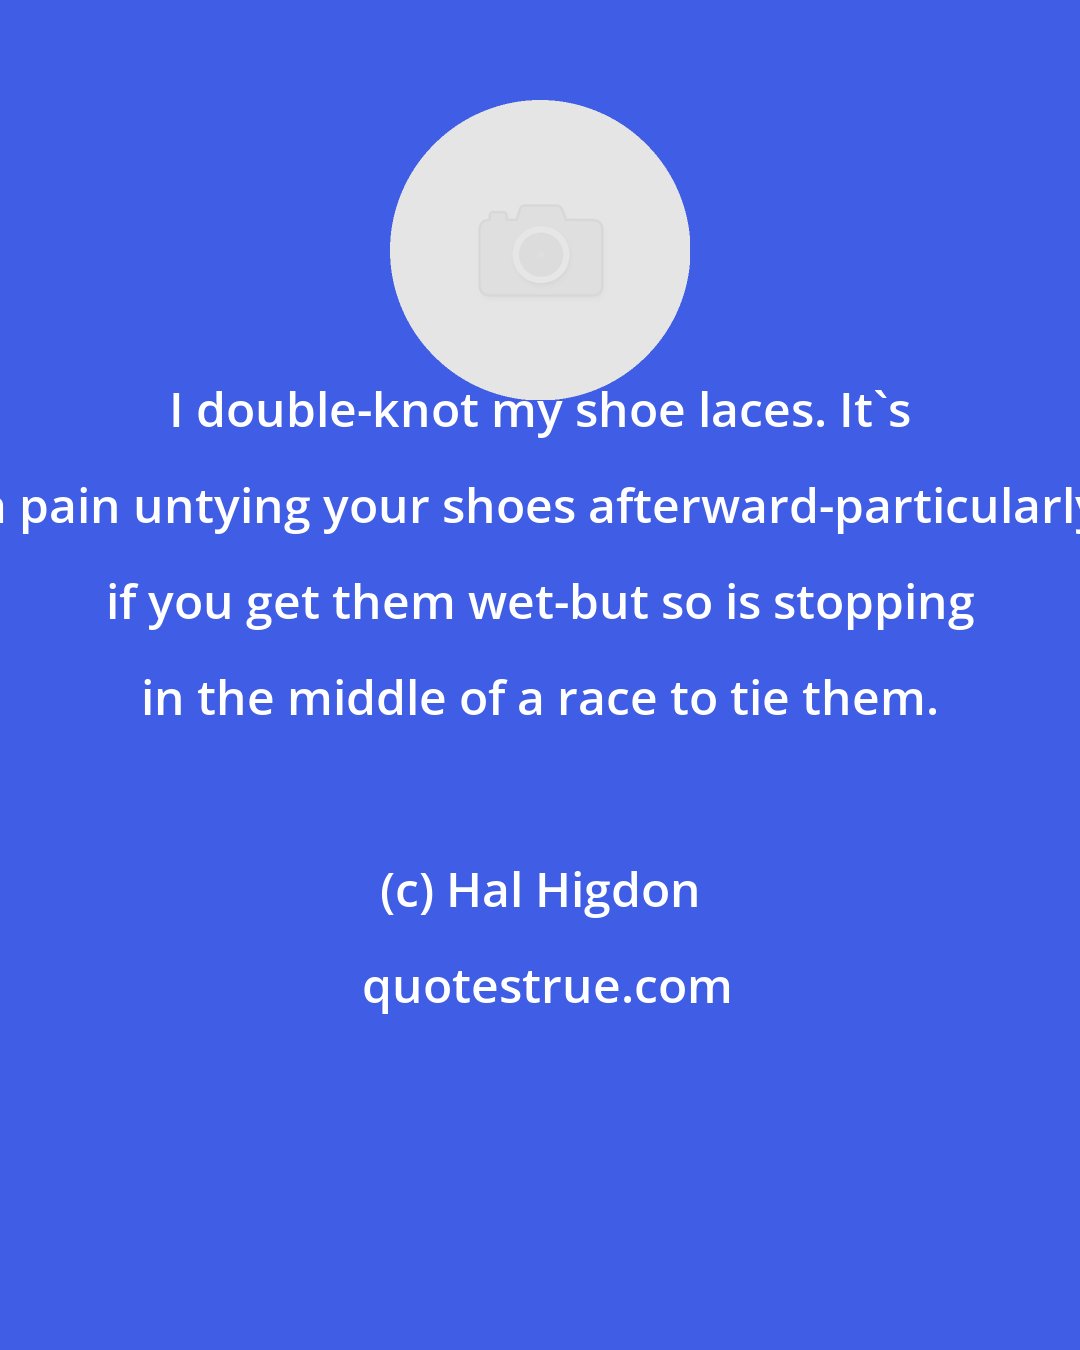 Hal Higdon: I double-knot my shoe laces. It's a pain untying your shoes afterward-particularly if you get them wet-but so is stopping in the middle of a race to tie them.